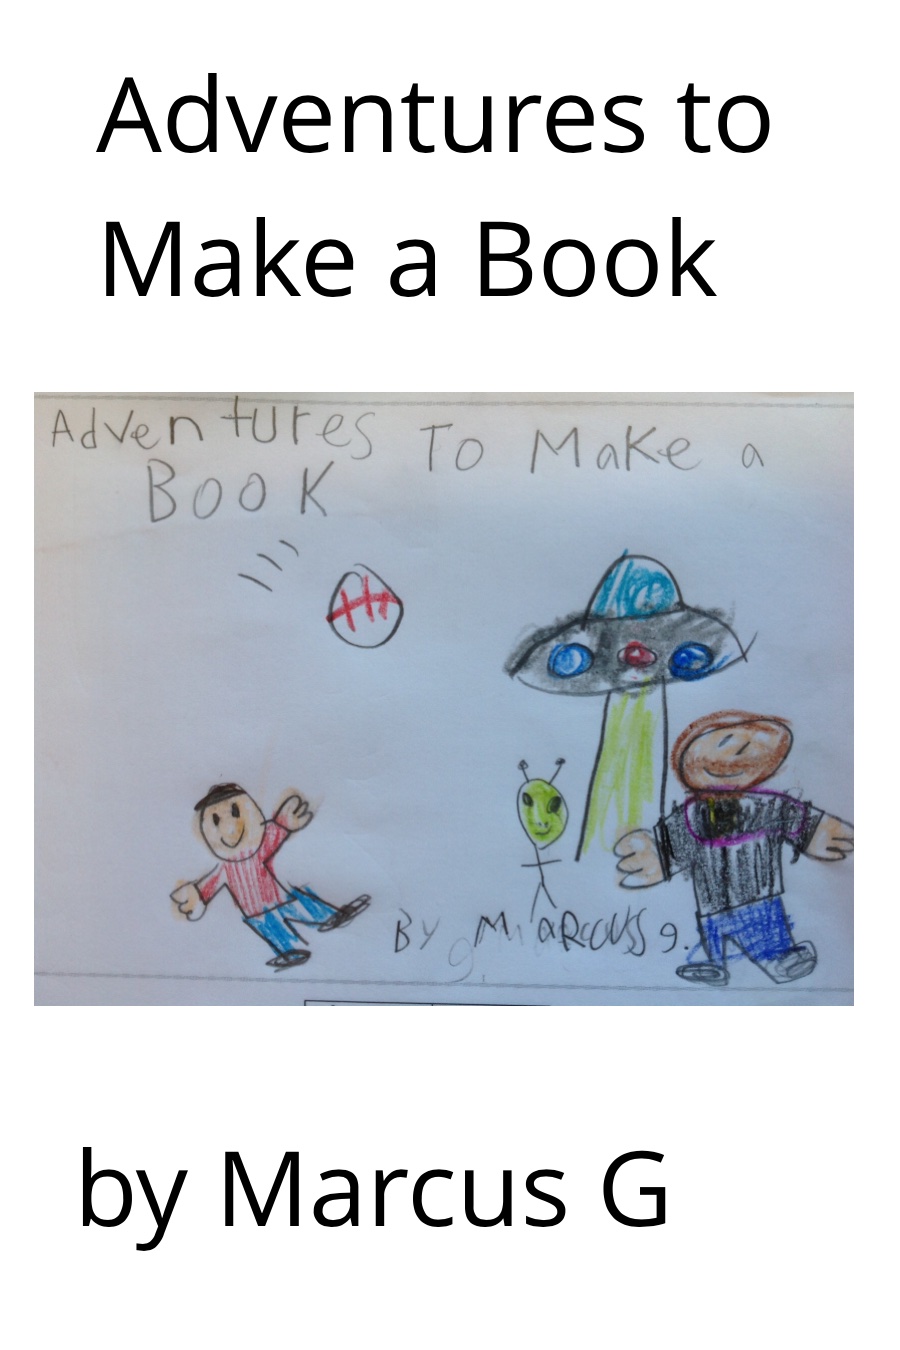 Adventures To Make a Book by Marcus G